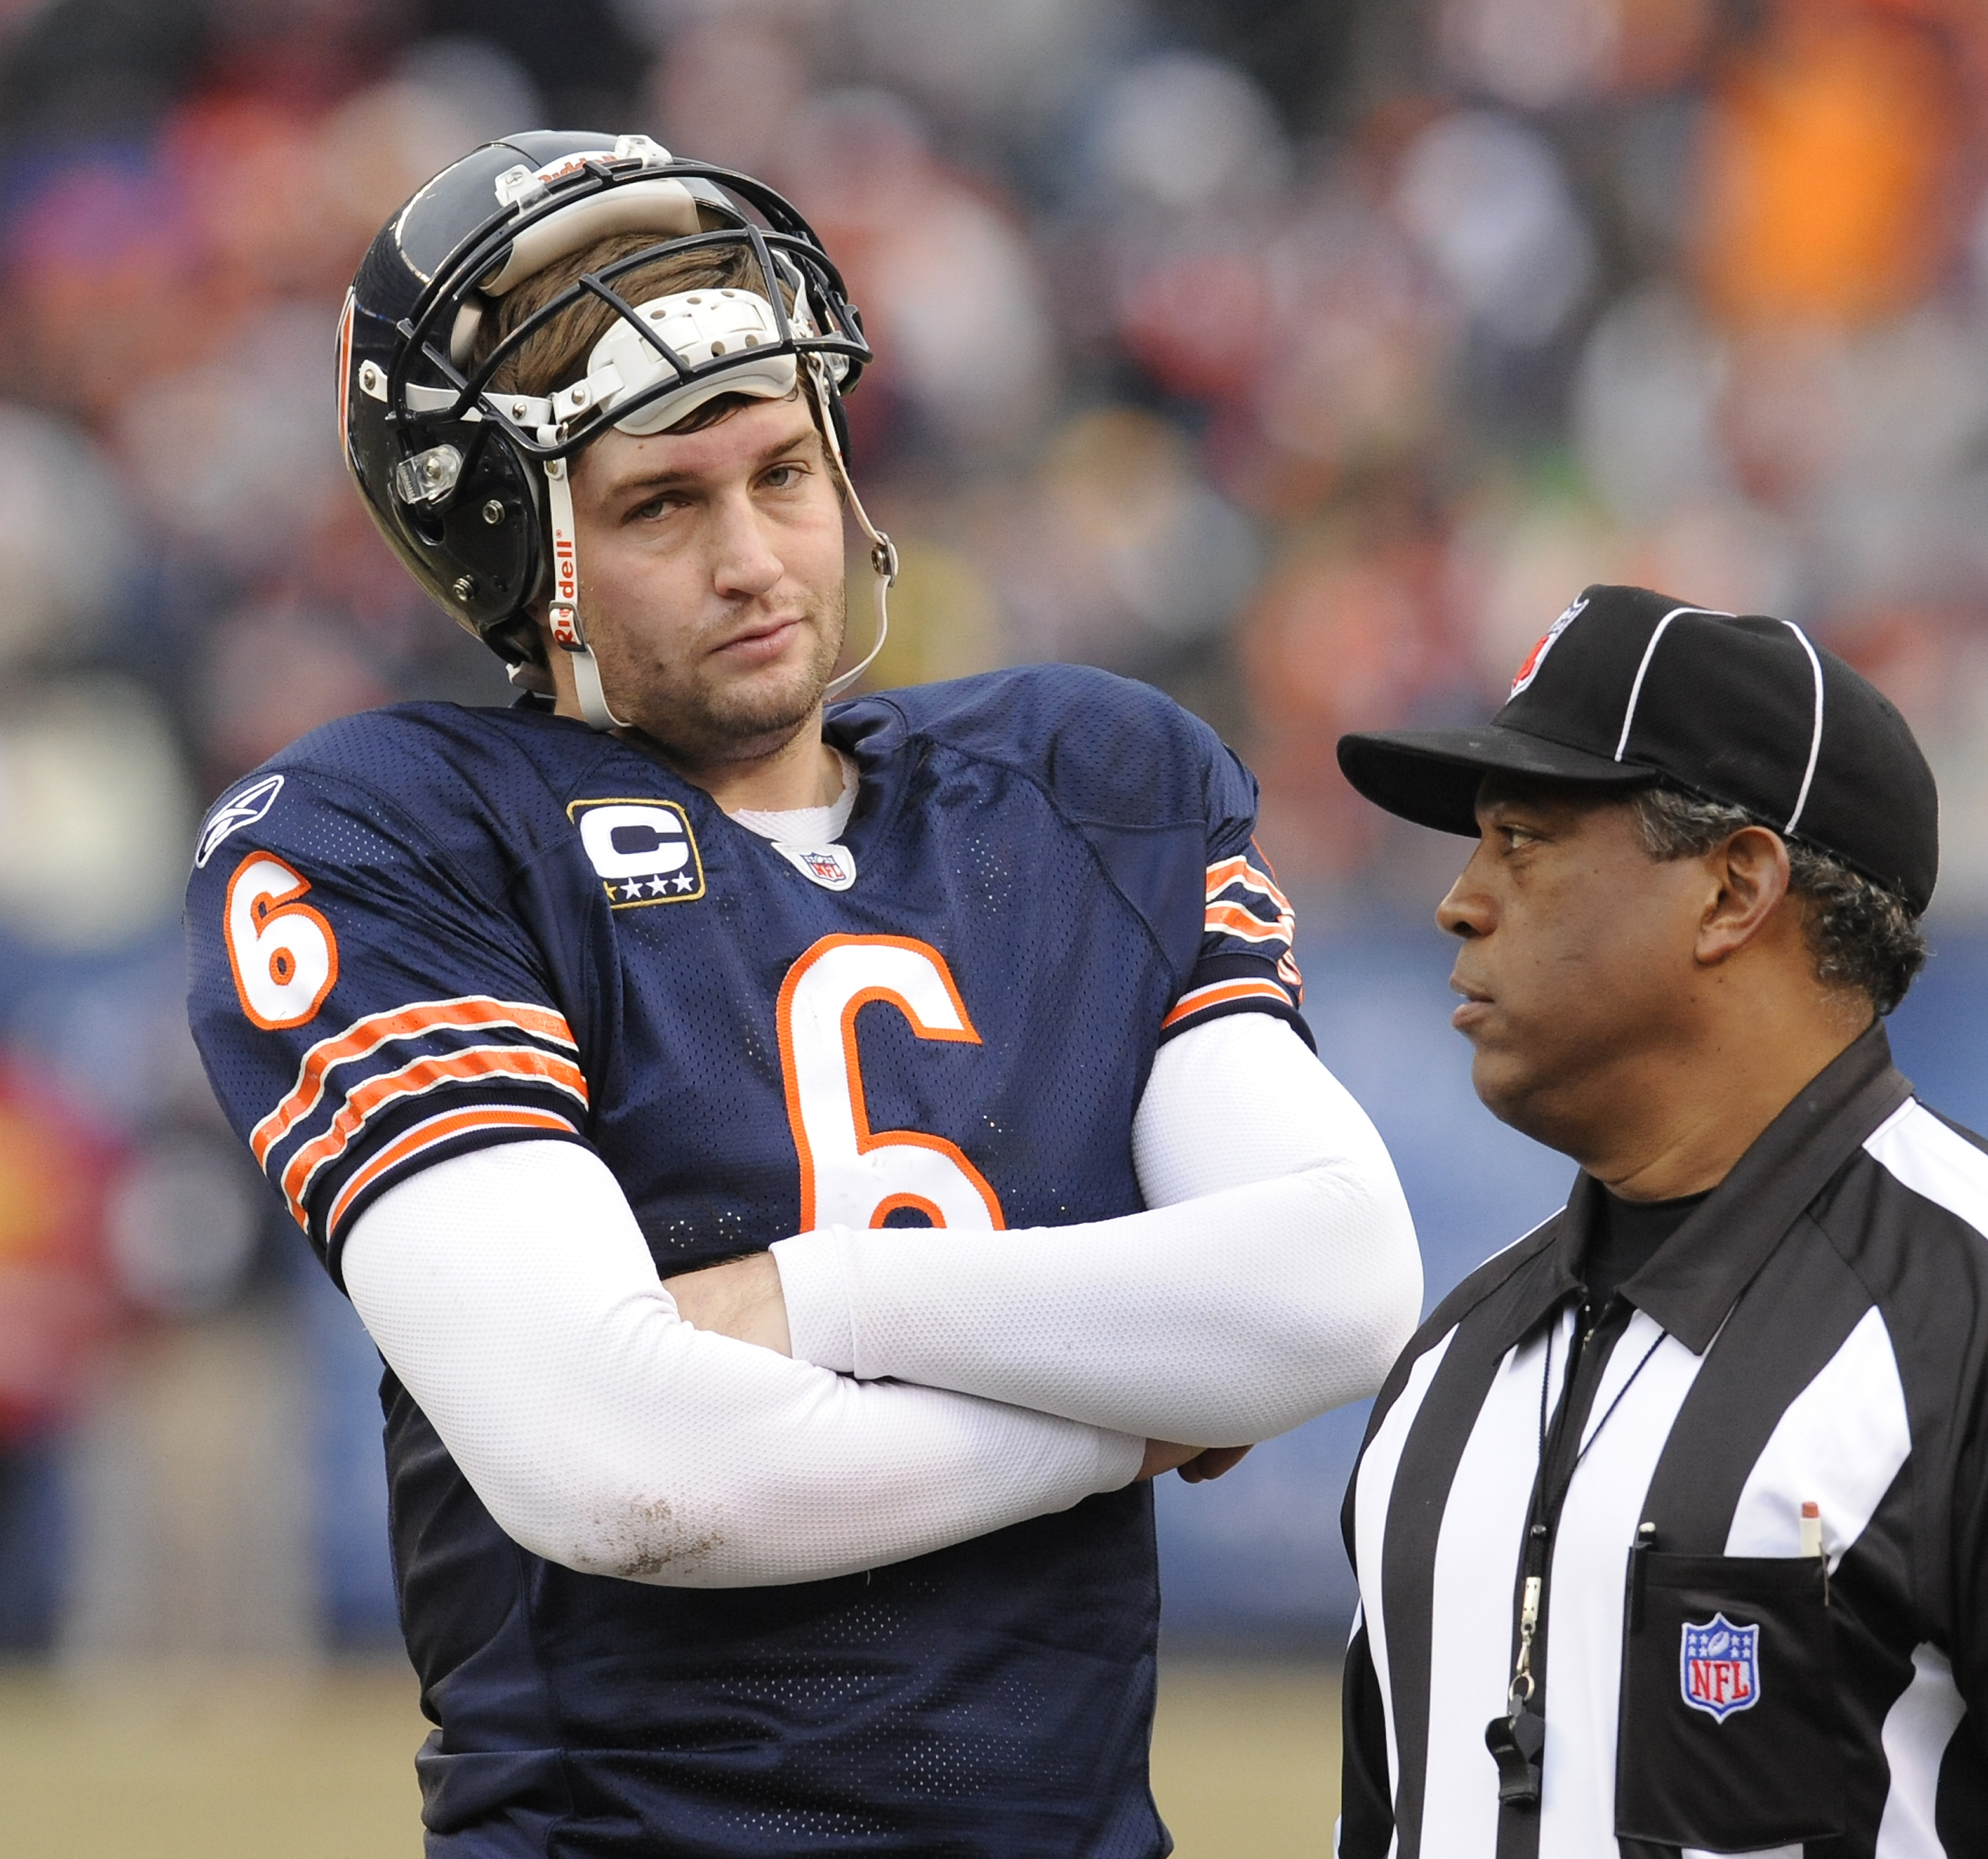 12-13-2009---Chicago Bears host the Green Bay Packers---Bears quarterback Jay Cutler waits for a challange call regarding a possible Bears TD in the 2nd quarter--Sun-Times photo by Tom Cruze